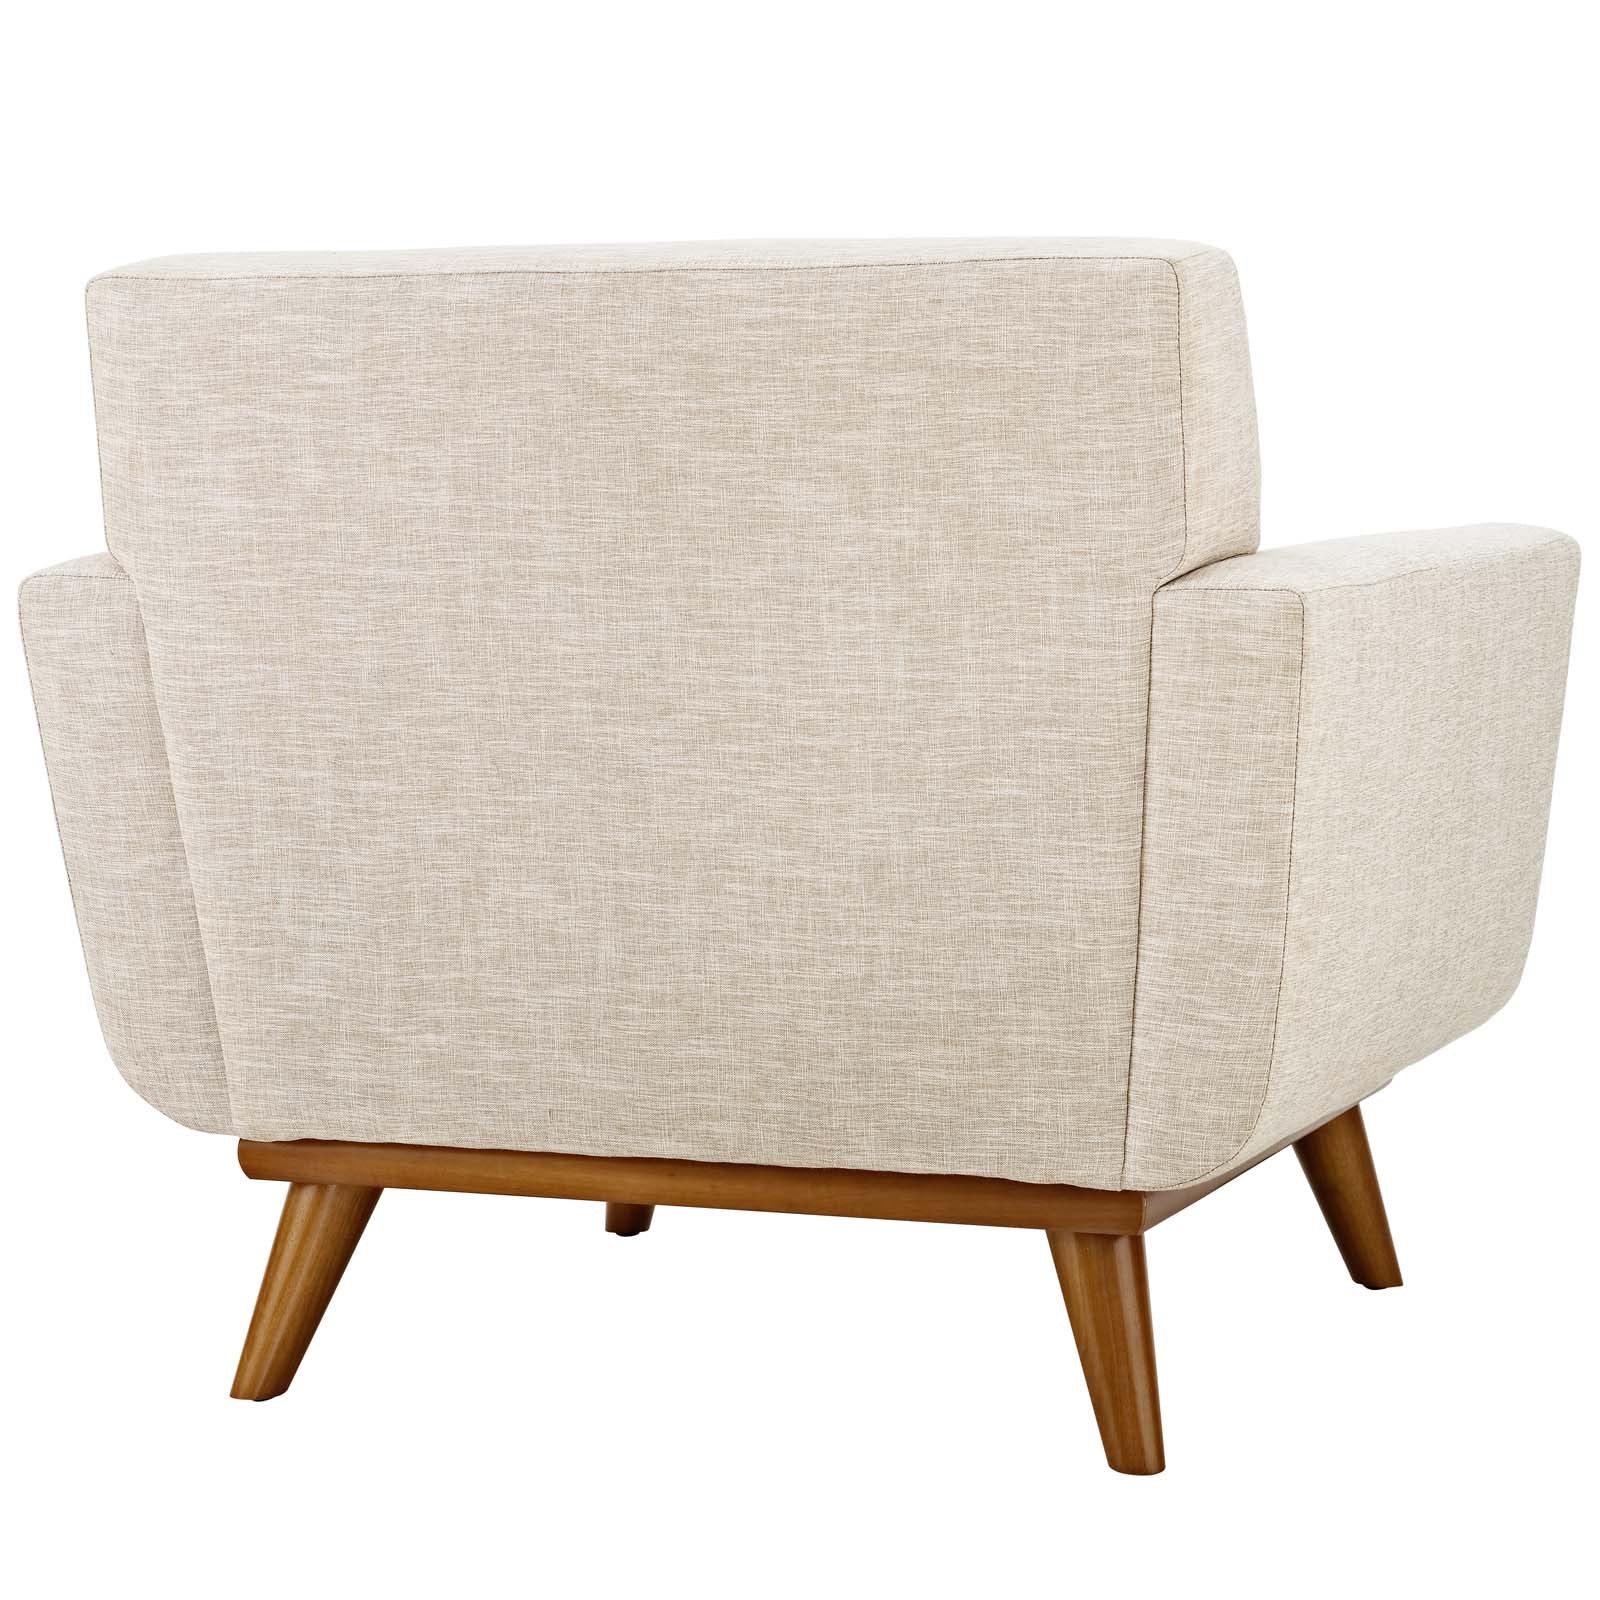 Modway Accent Chairs - Engage Upholstered Fabric Armchair Beige